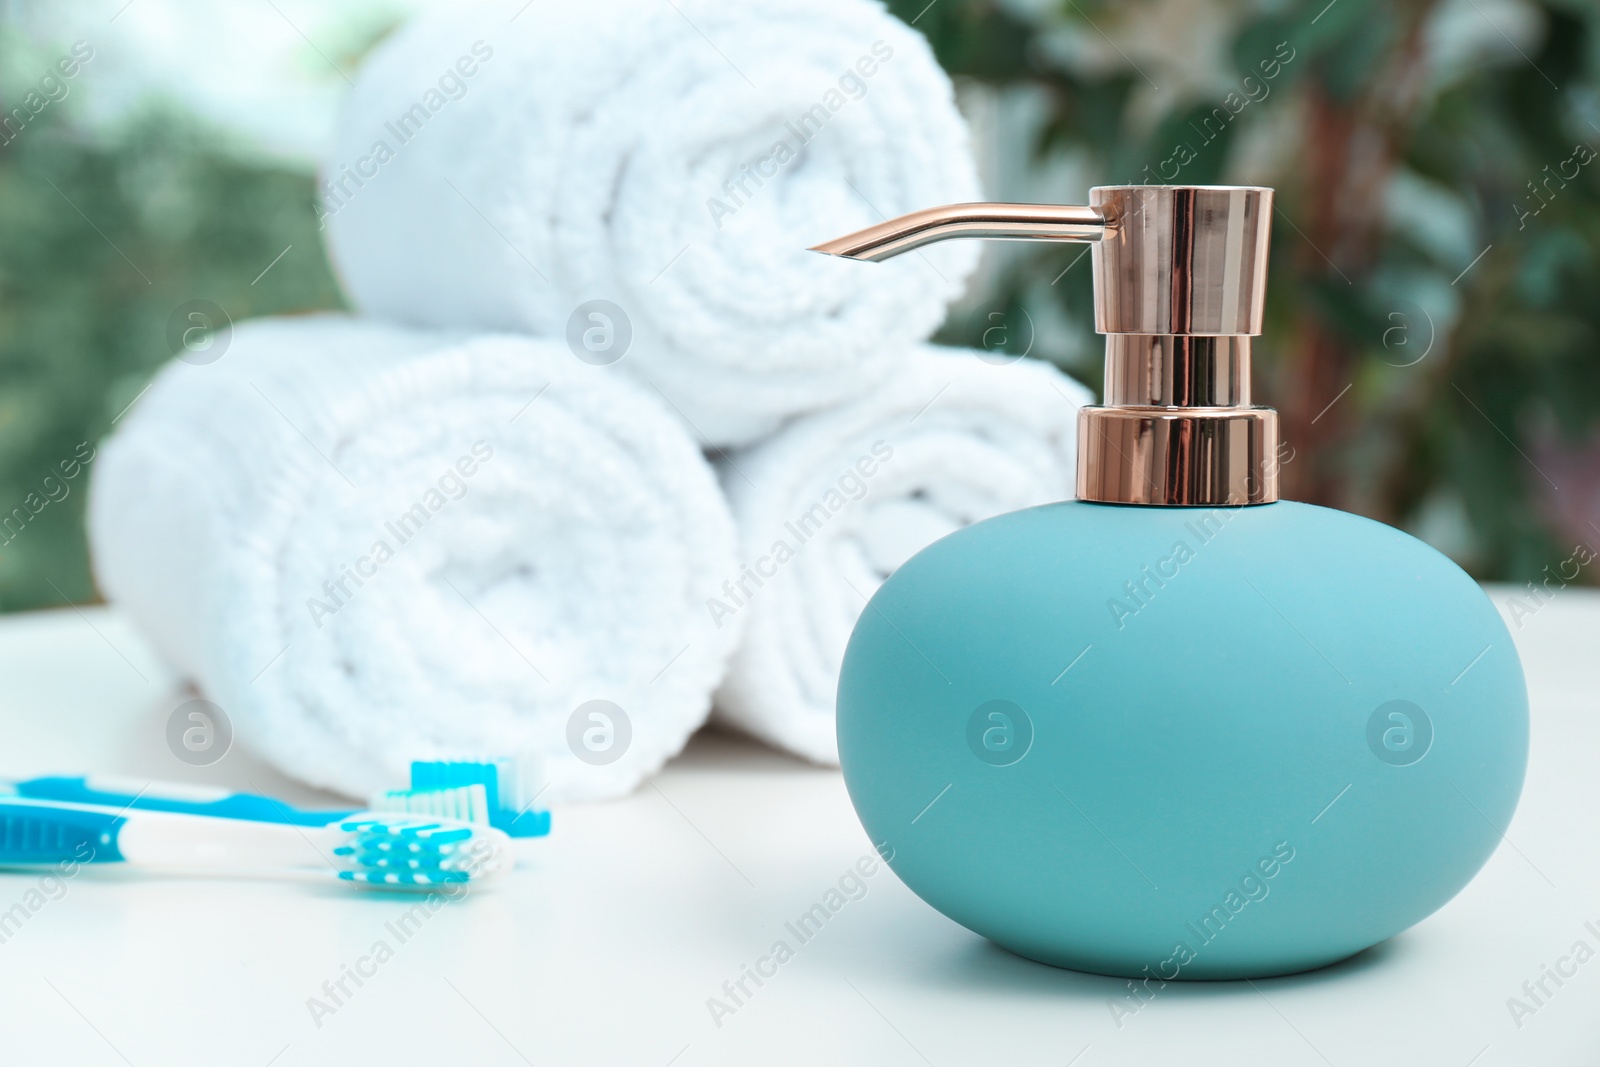 Photo of Soap dispenser and bathroom essentials on table against blurred background